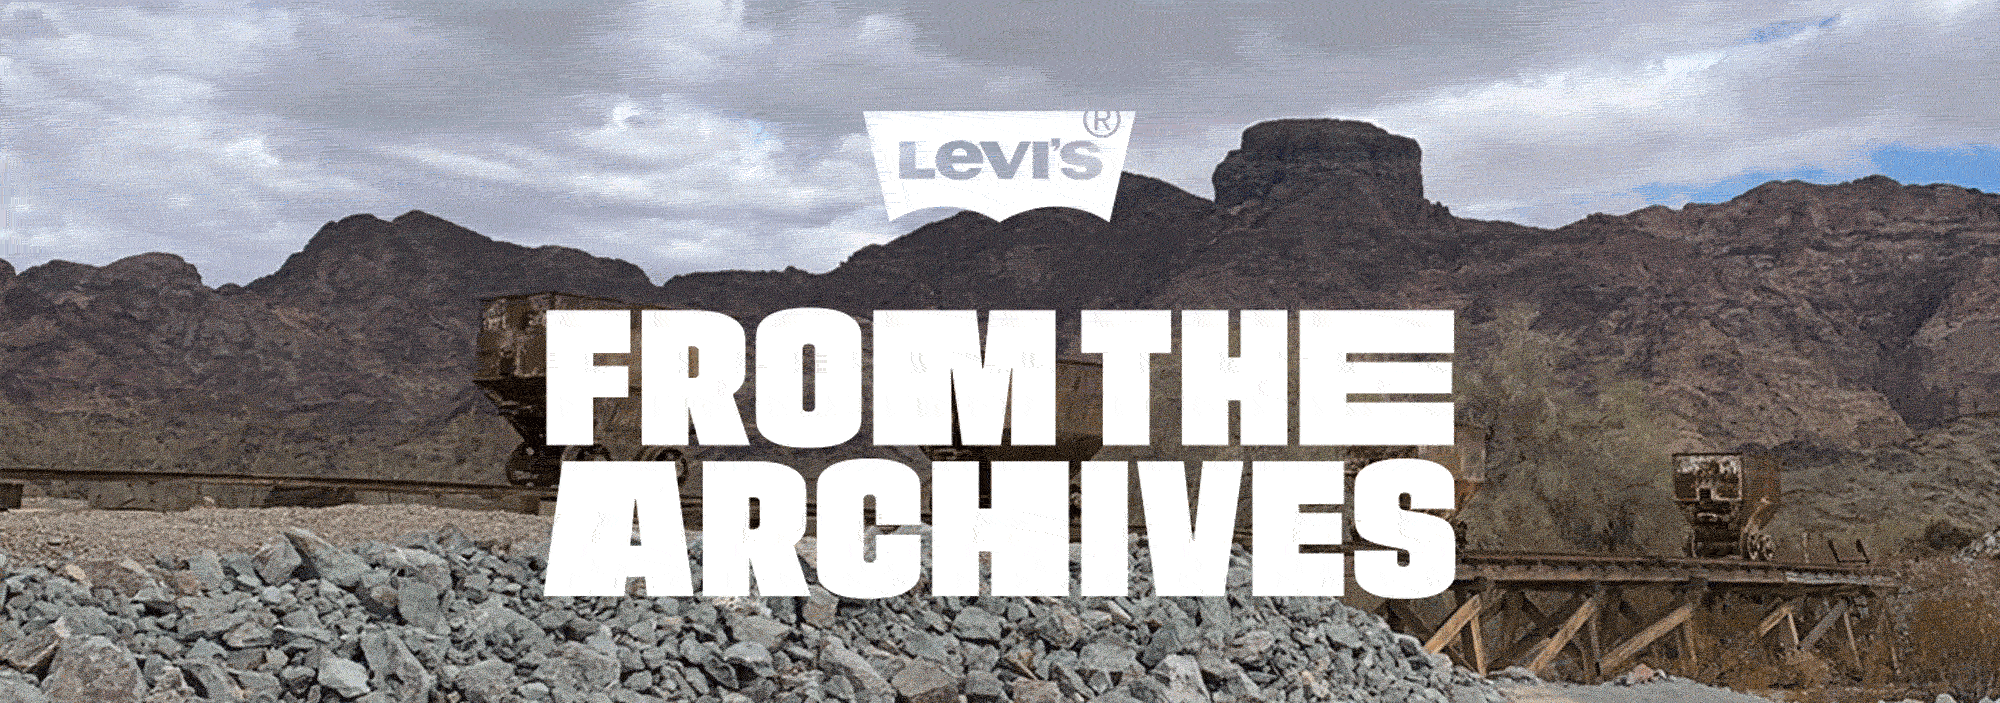 Step Inside The Levi's Archieve: Find at Castle Dome - Levi's Hong Kong